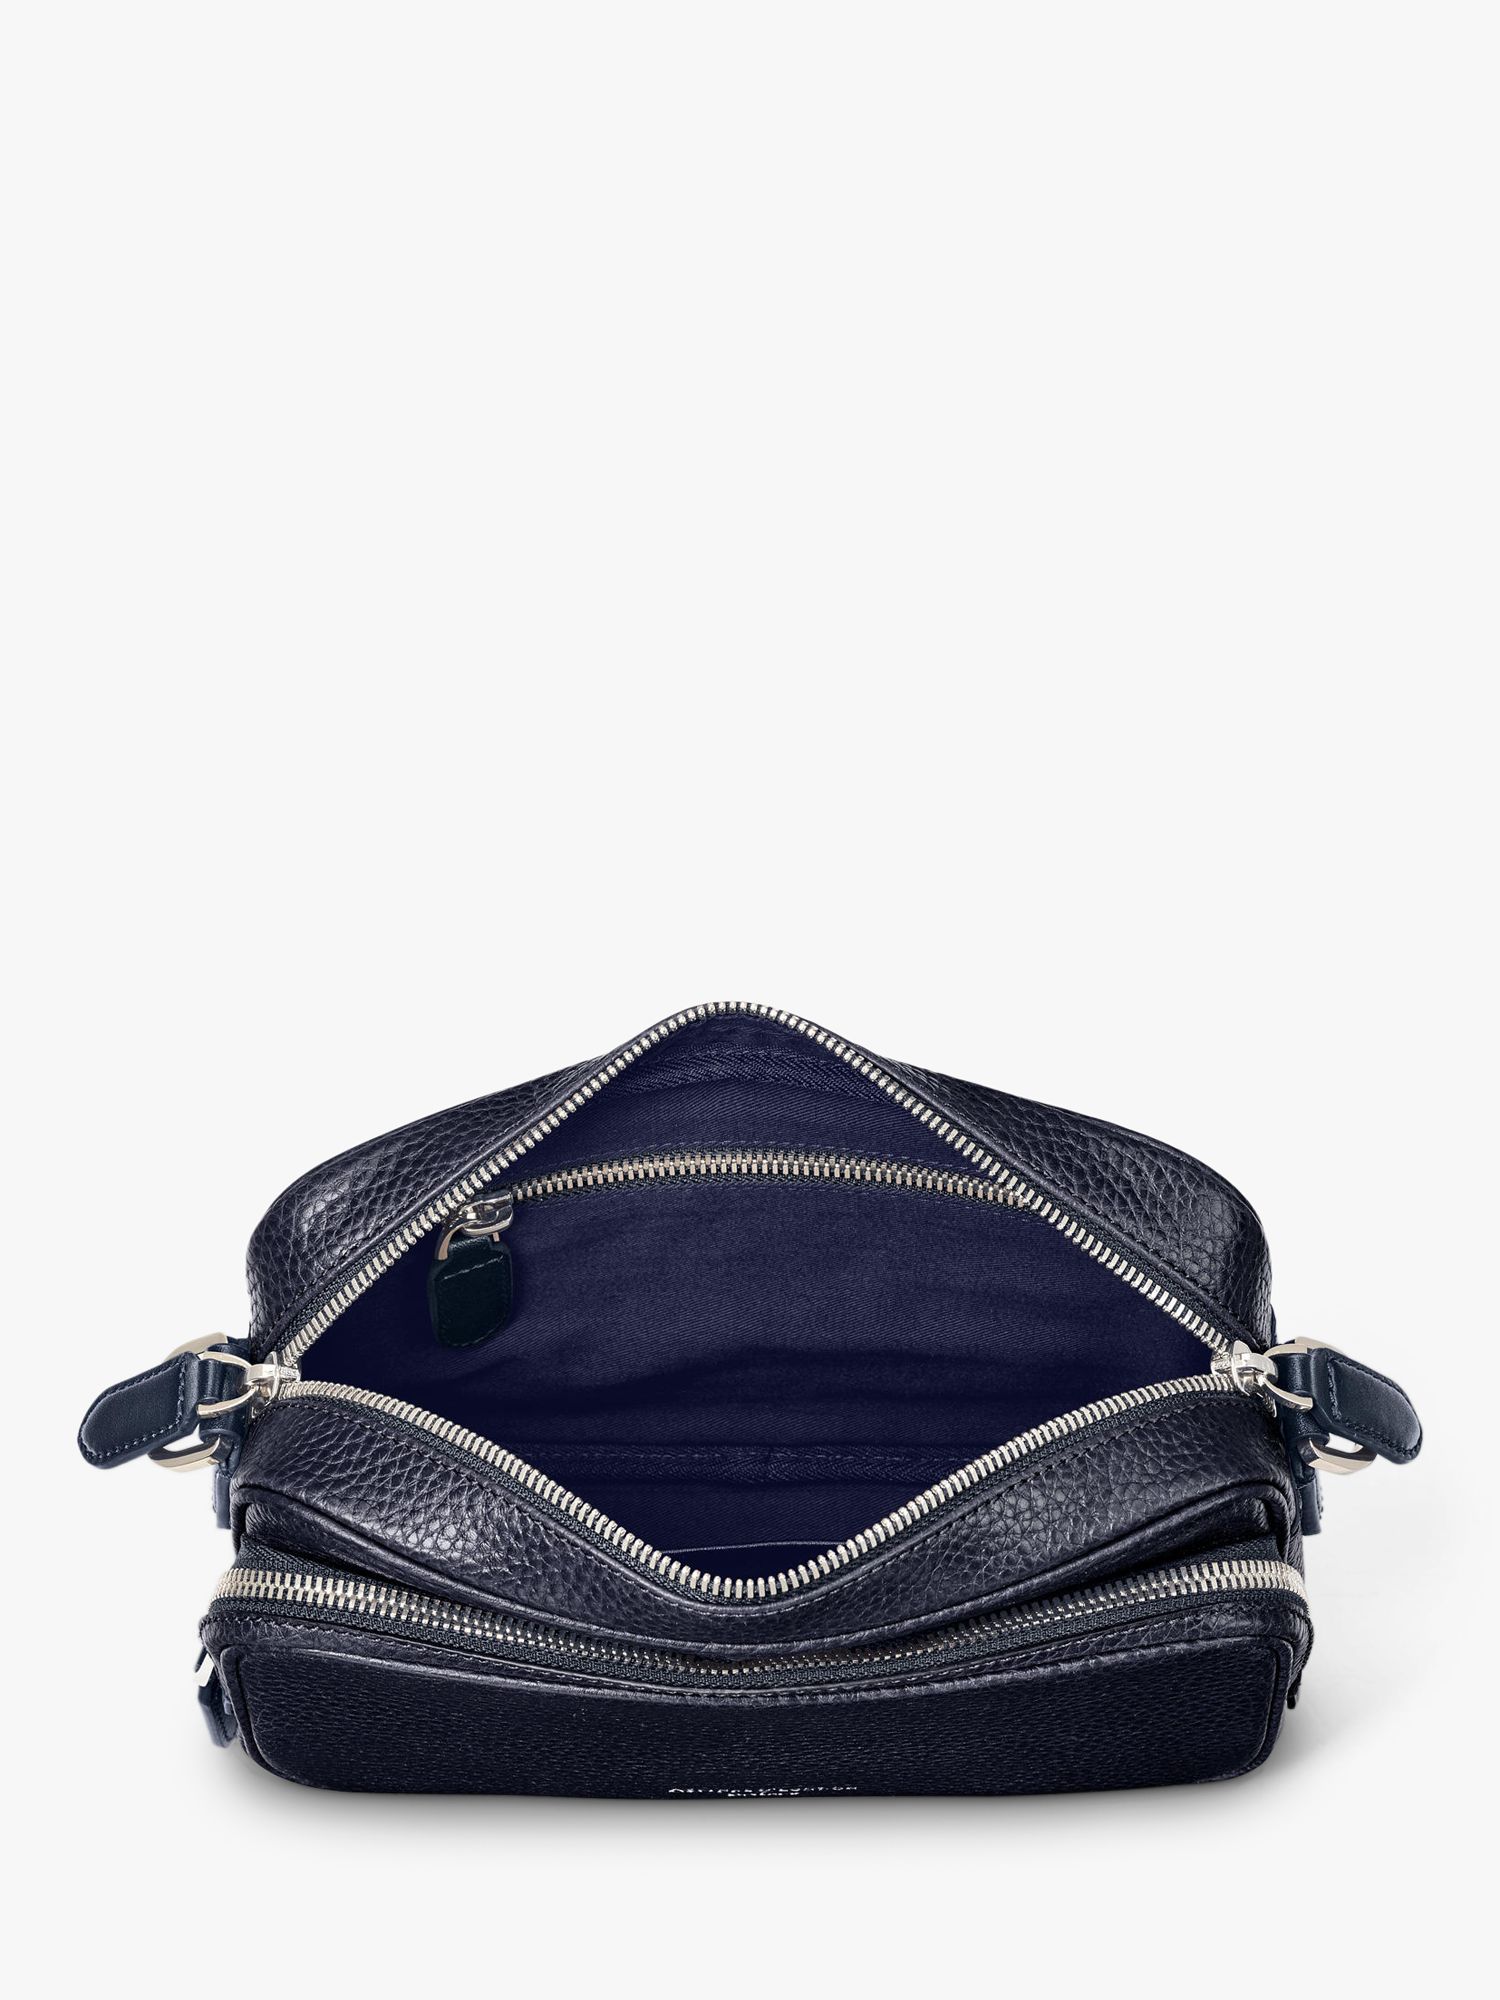 Aspinal of London Reporter East West Pebble Leather Messenger Bag, Navy